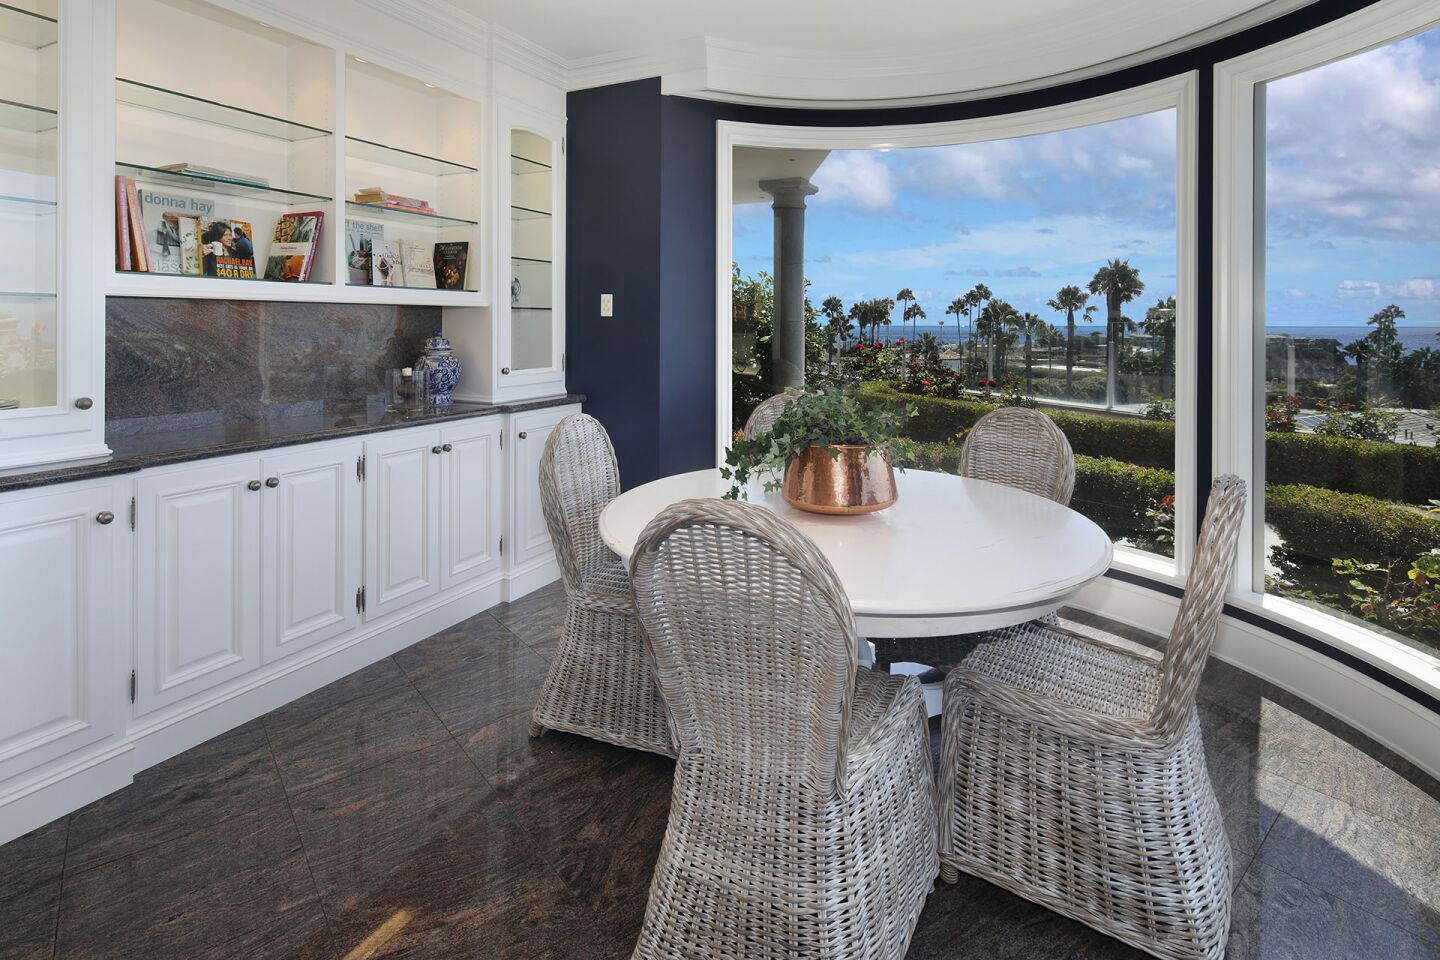 A breakfast room sits off the kitchen.